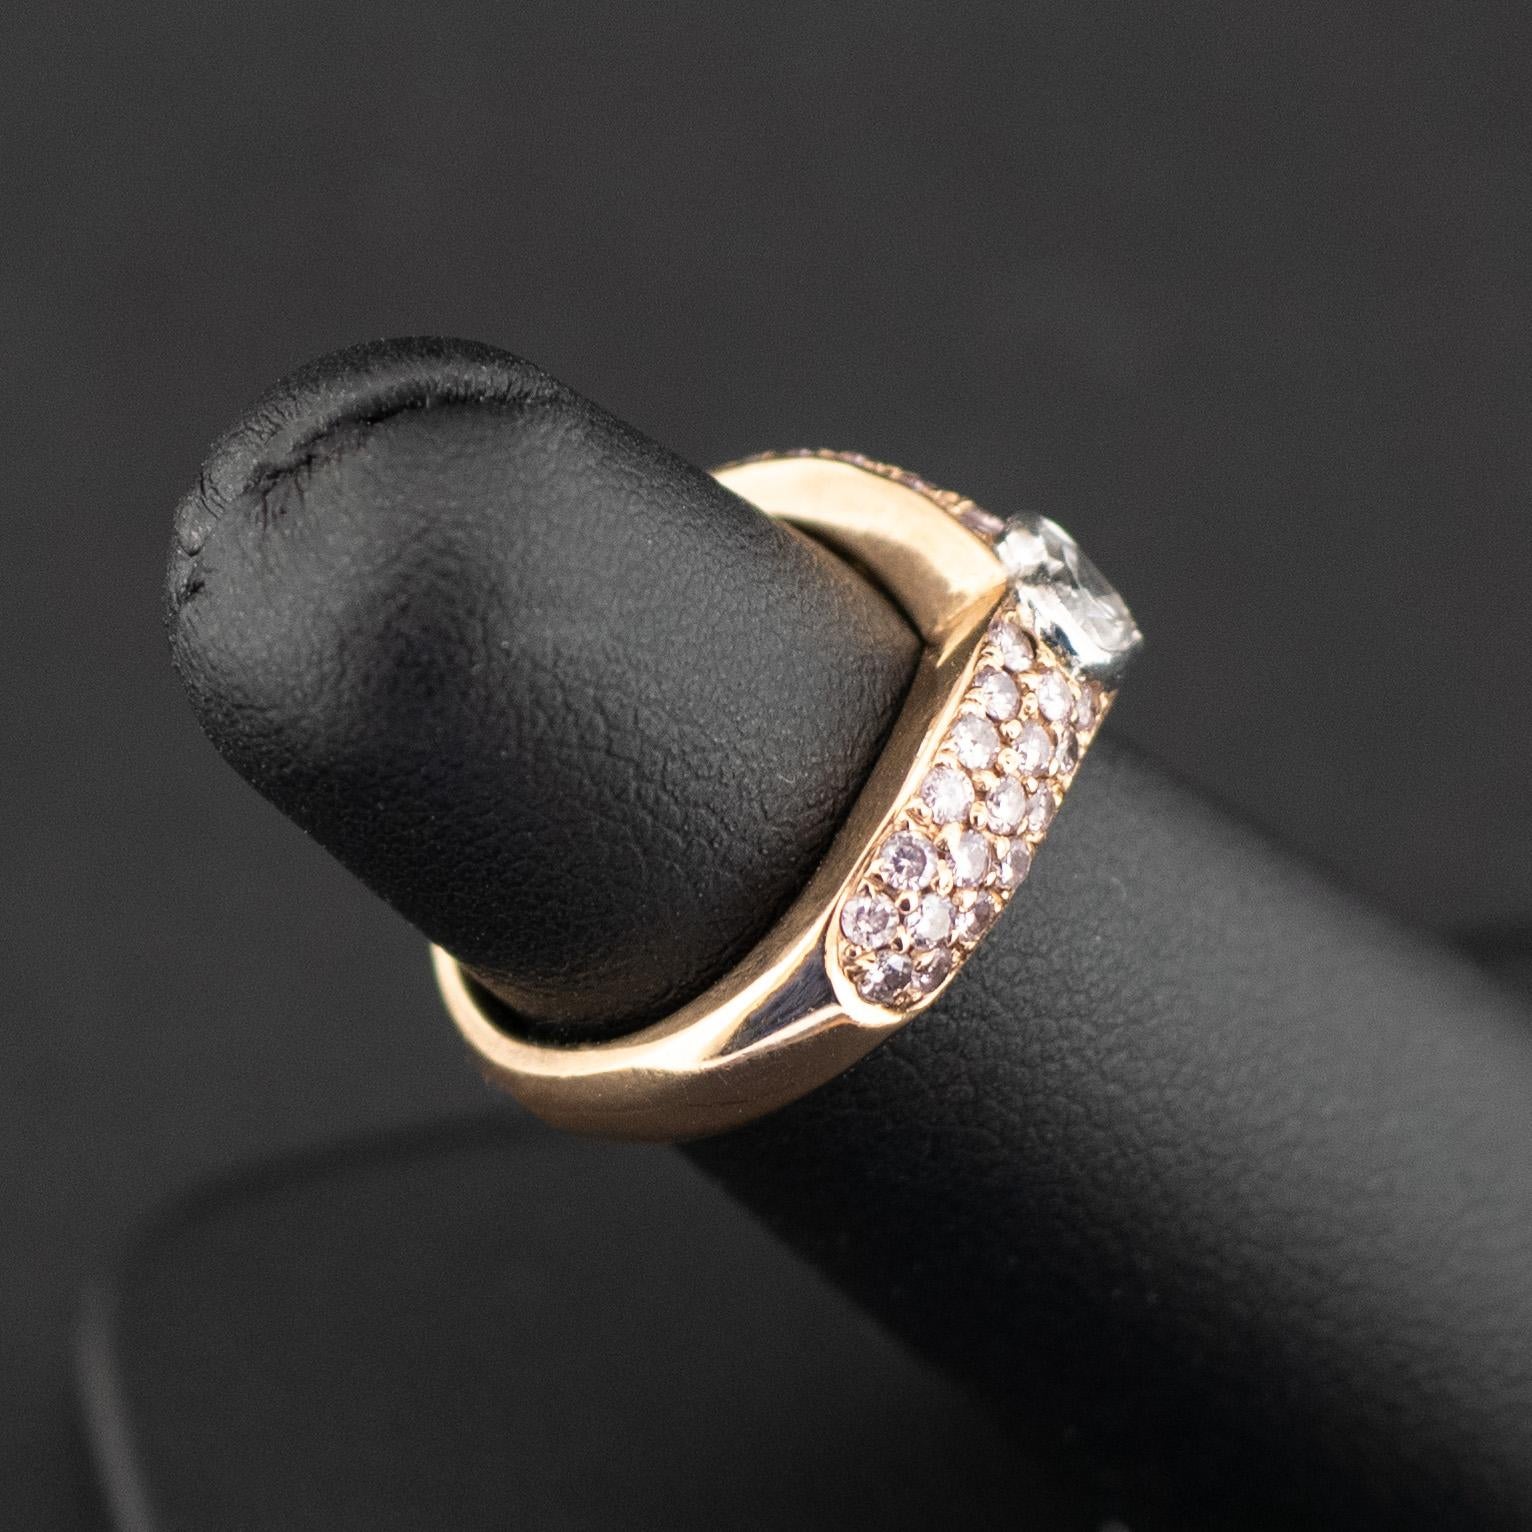 Condition: Pre-owned with mild/light scratches
Material: 18ct Rose Gold 
Main Stone: 0.25ct Heart-shaped Diamond
Main Diamond Clarity: VS-Si1
Main Diamond Colour: H-I
Secondary Diamonds: Pave set SI-I1 pink tinted diamonds
Item Weight: 5.6g
Size: I